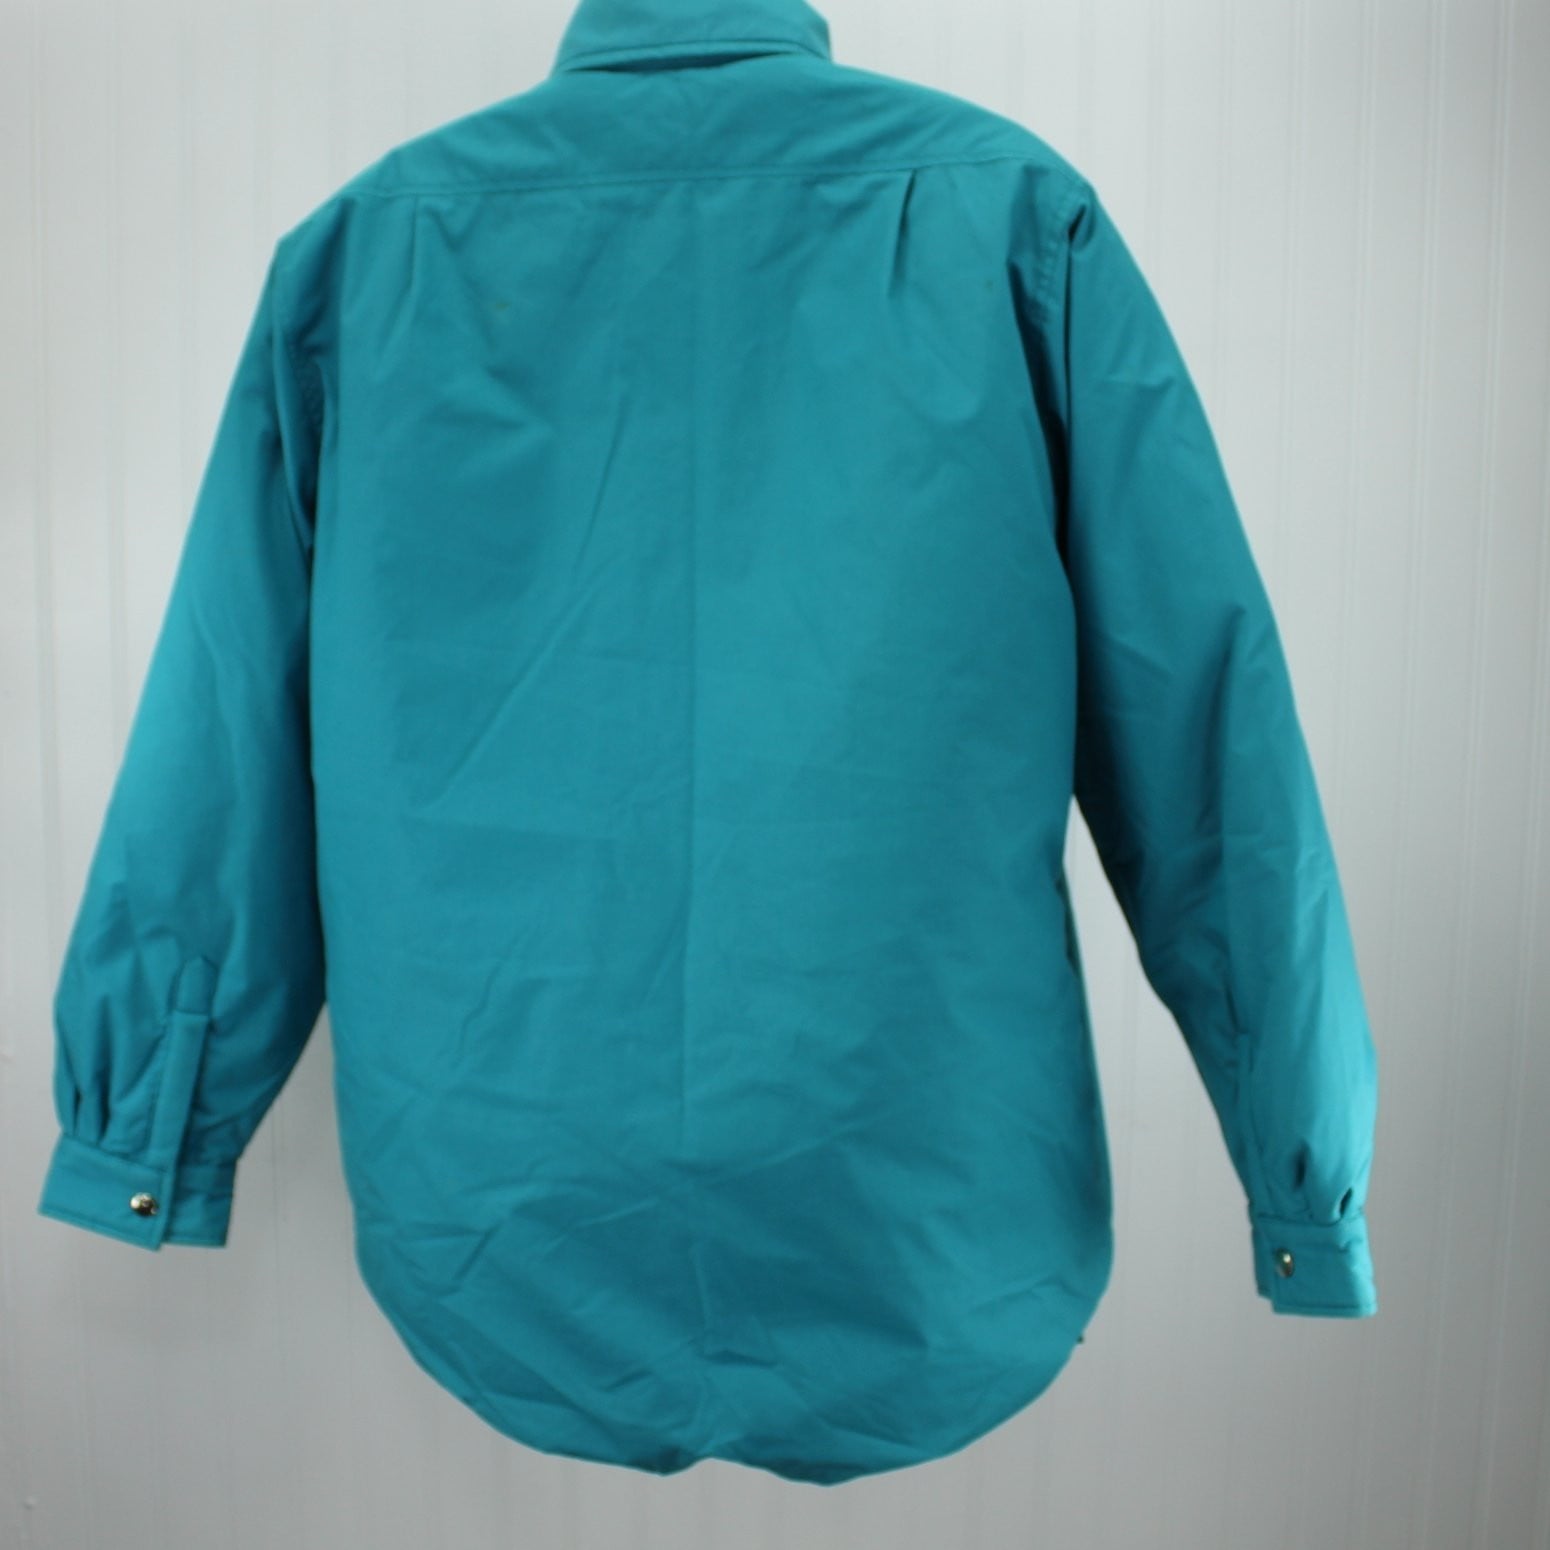 L L Bean Goose Down Jacket - Womens Size Large Used - Turquoise Snaps Barn Jacket well cut coat